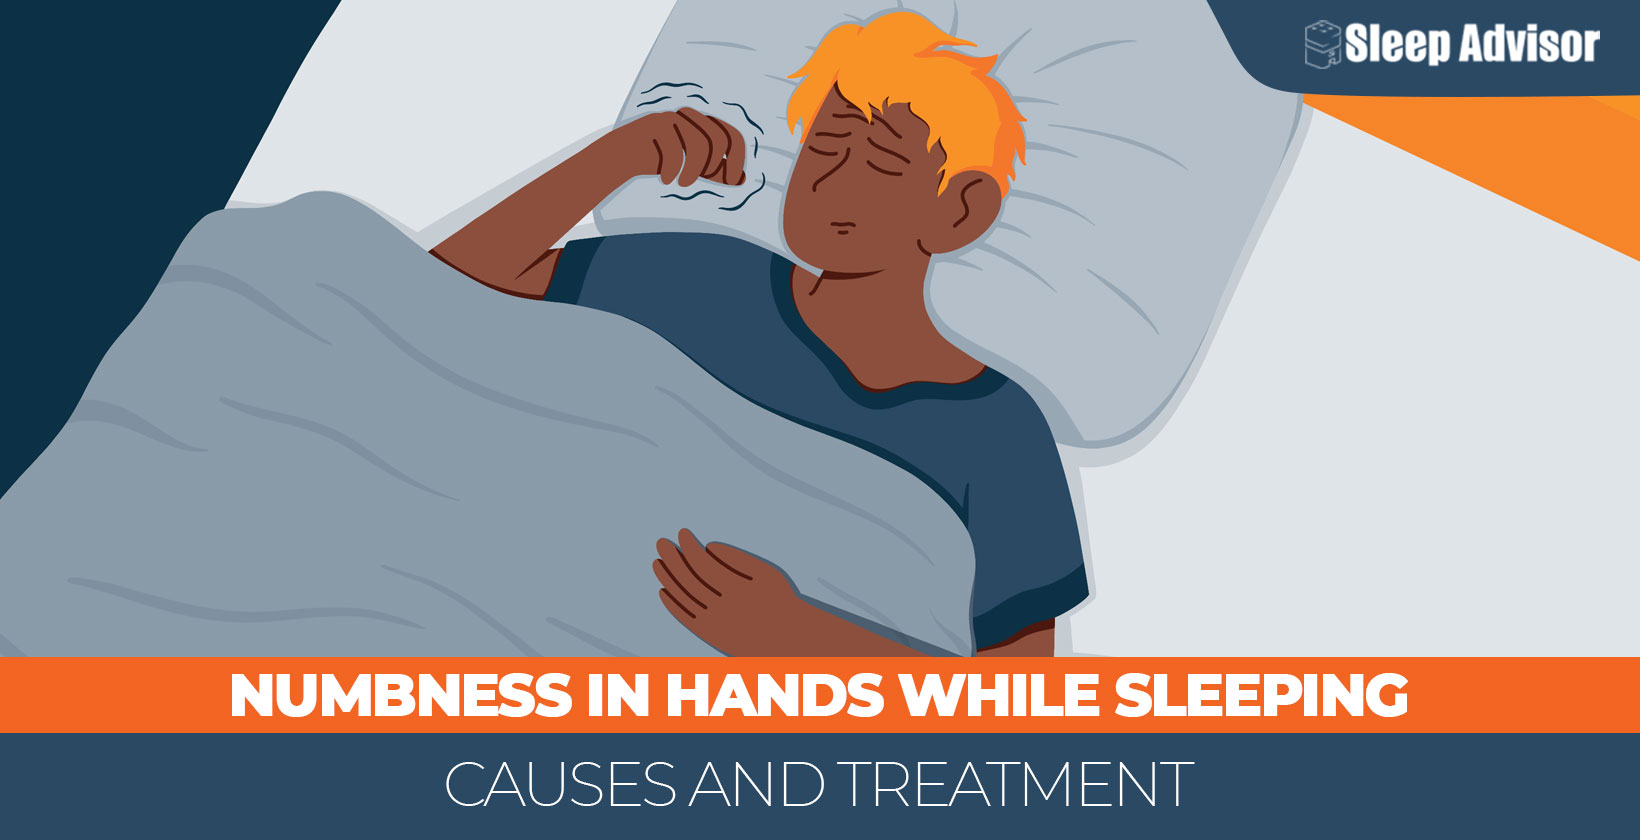 Numbness in Hands While Sleeping: Causes and Treatment